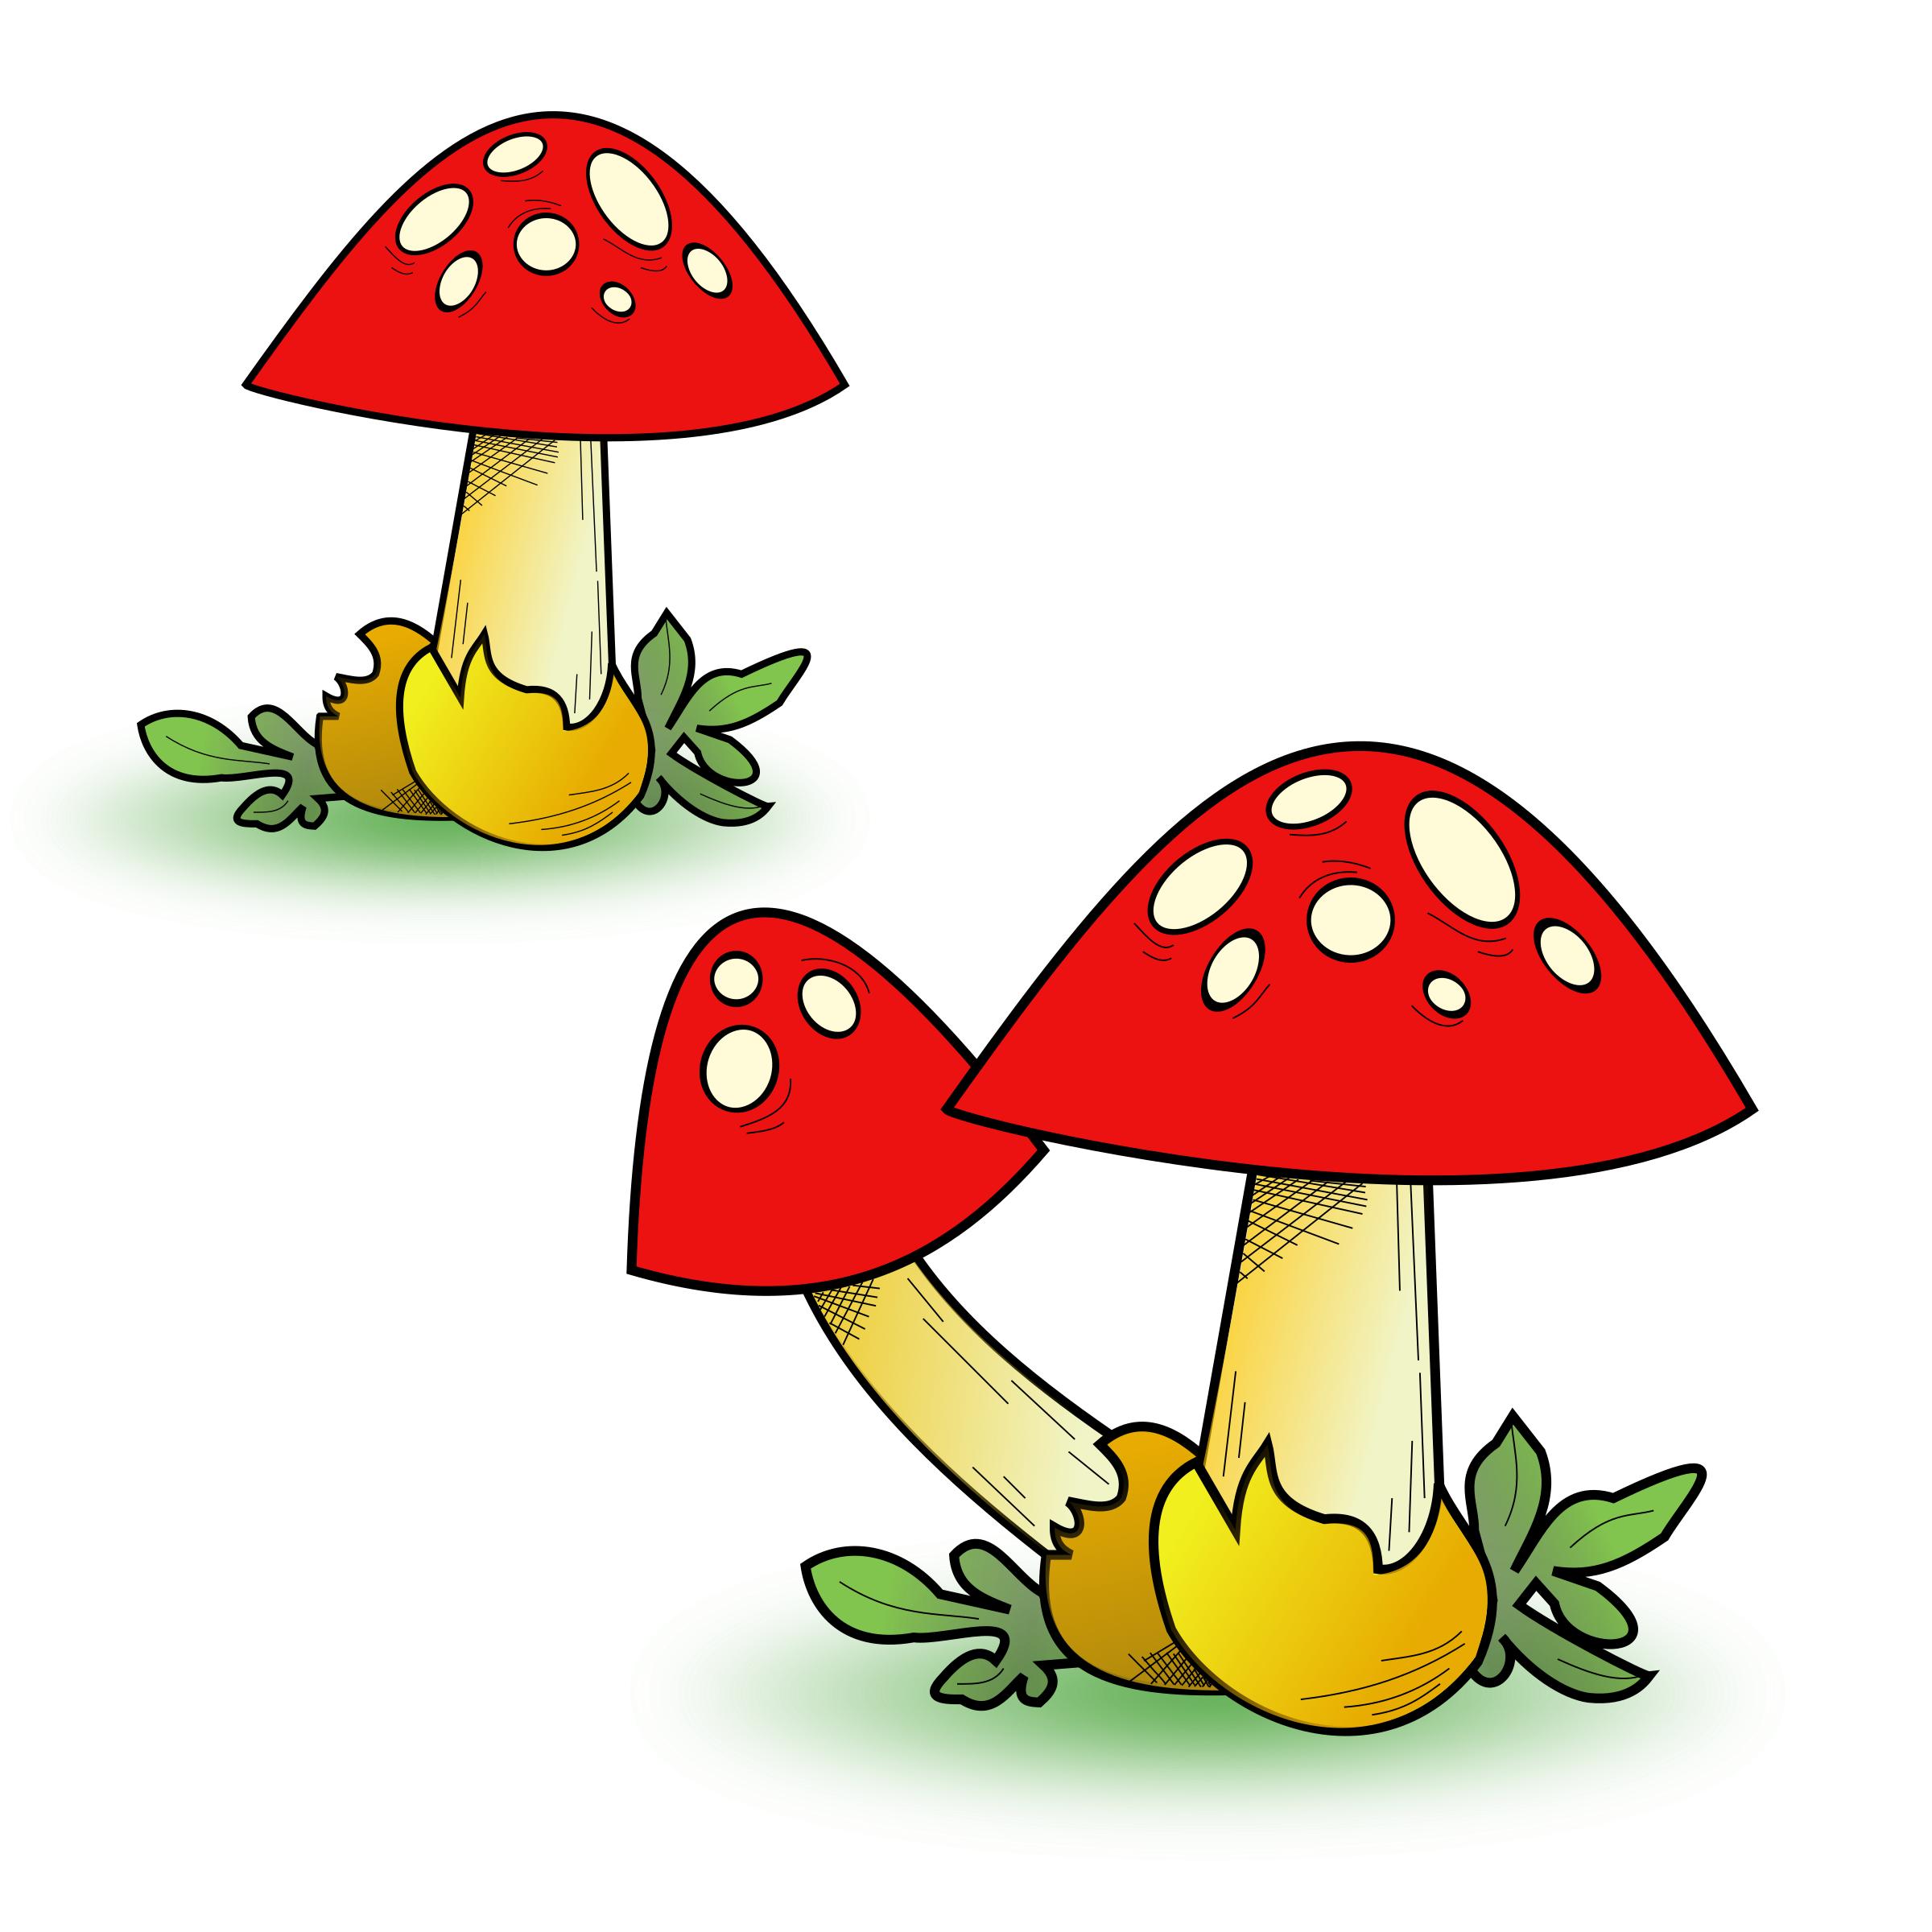 Heavy Fungal Forest png